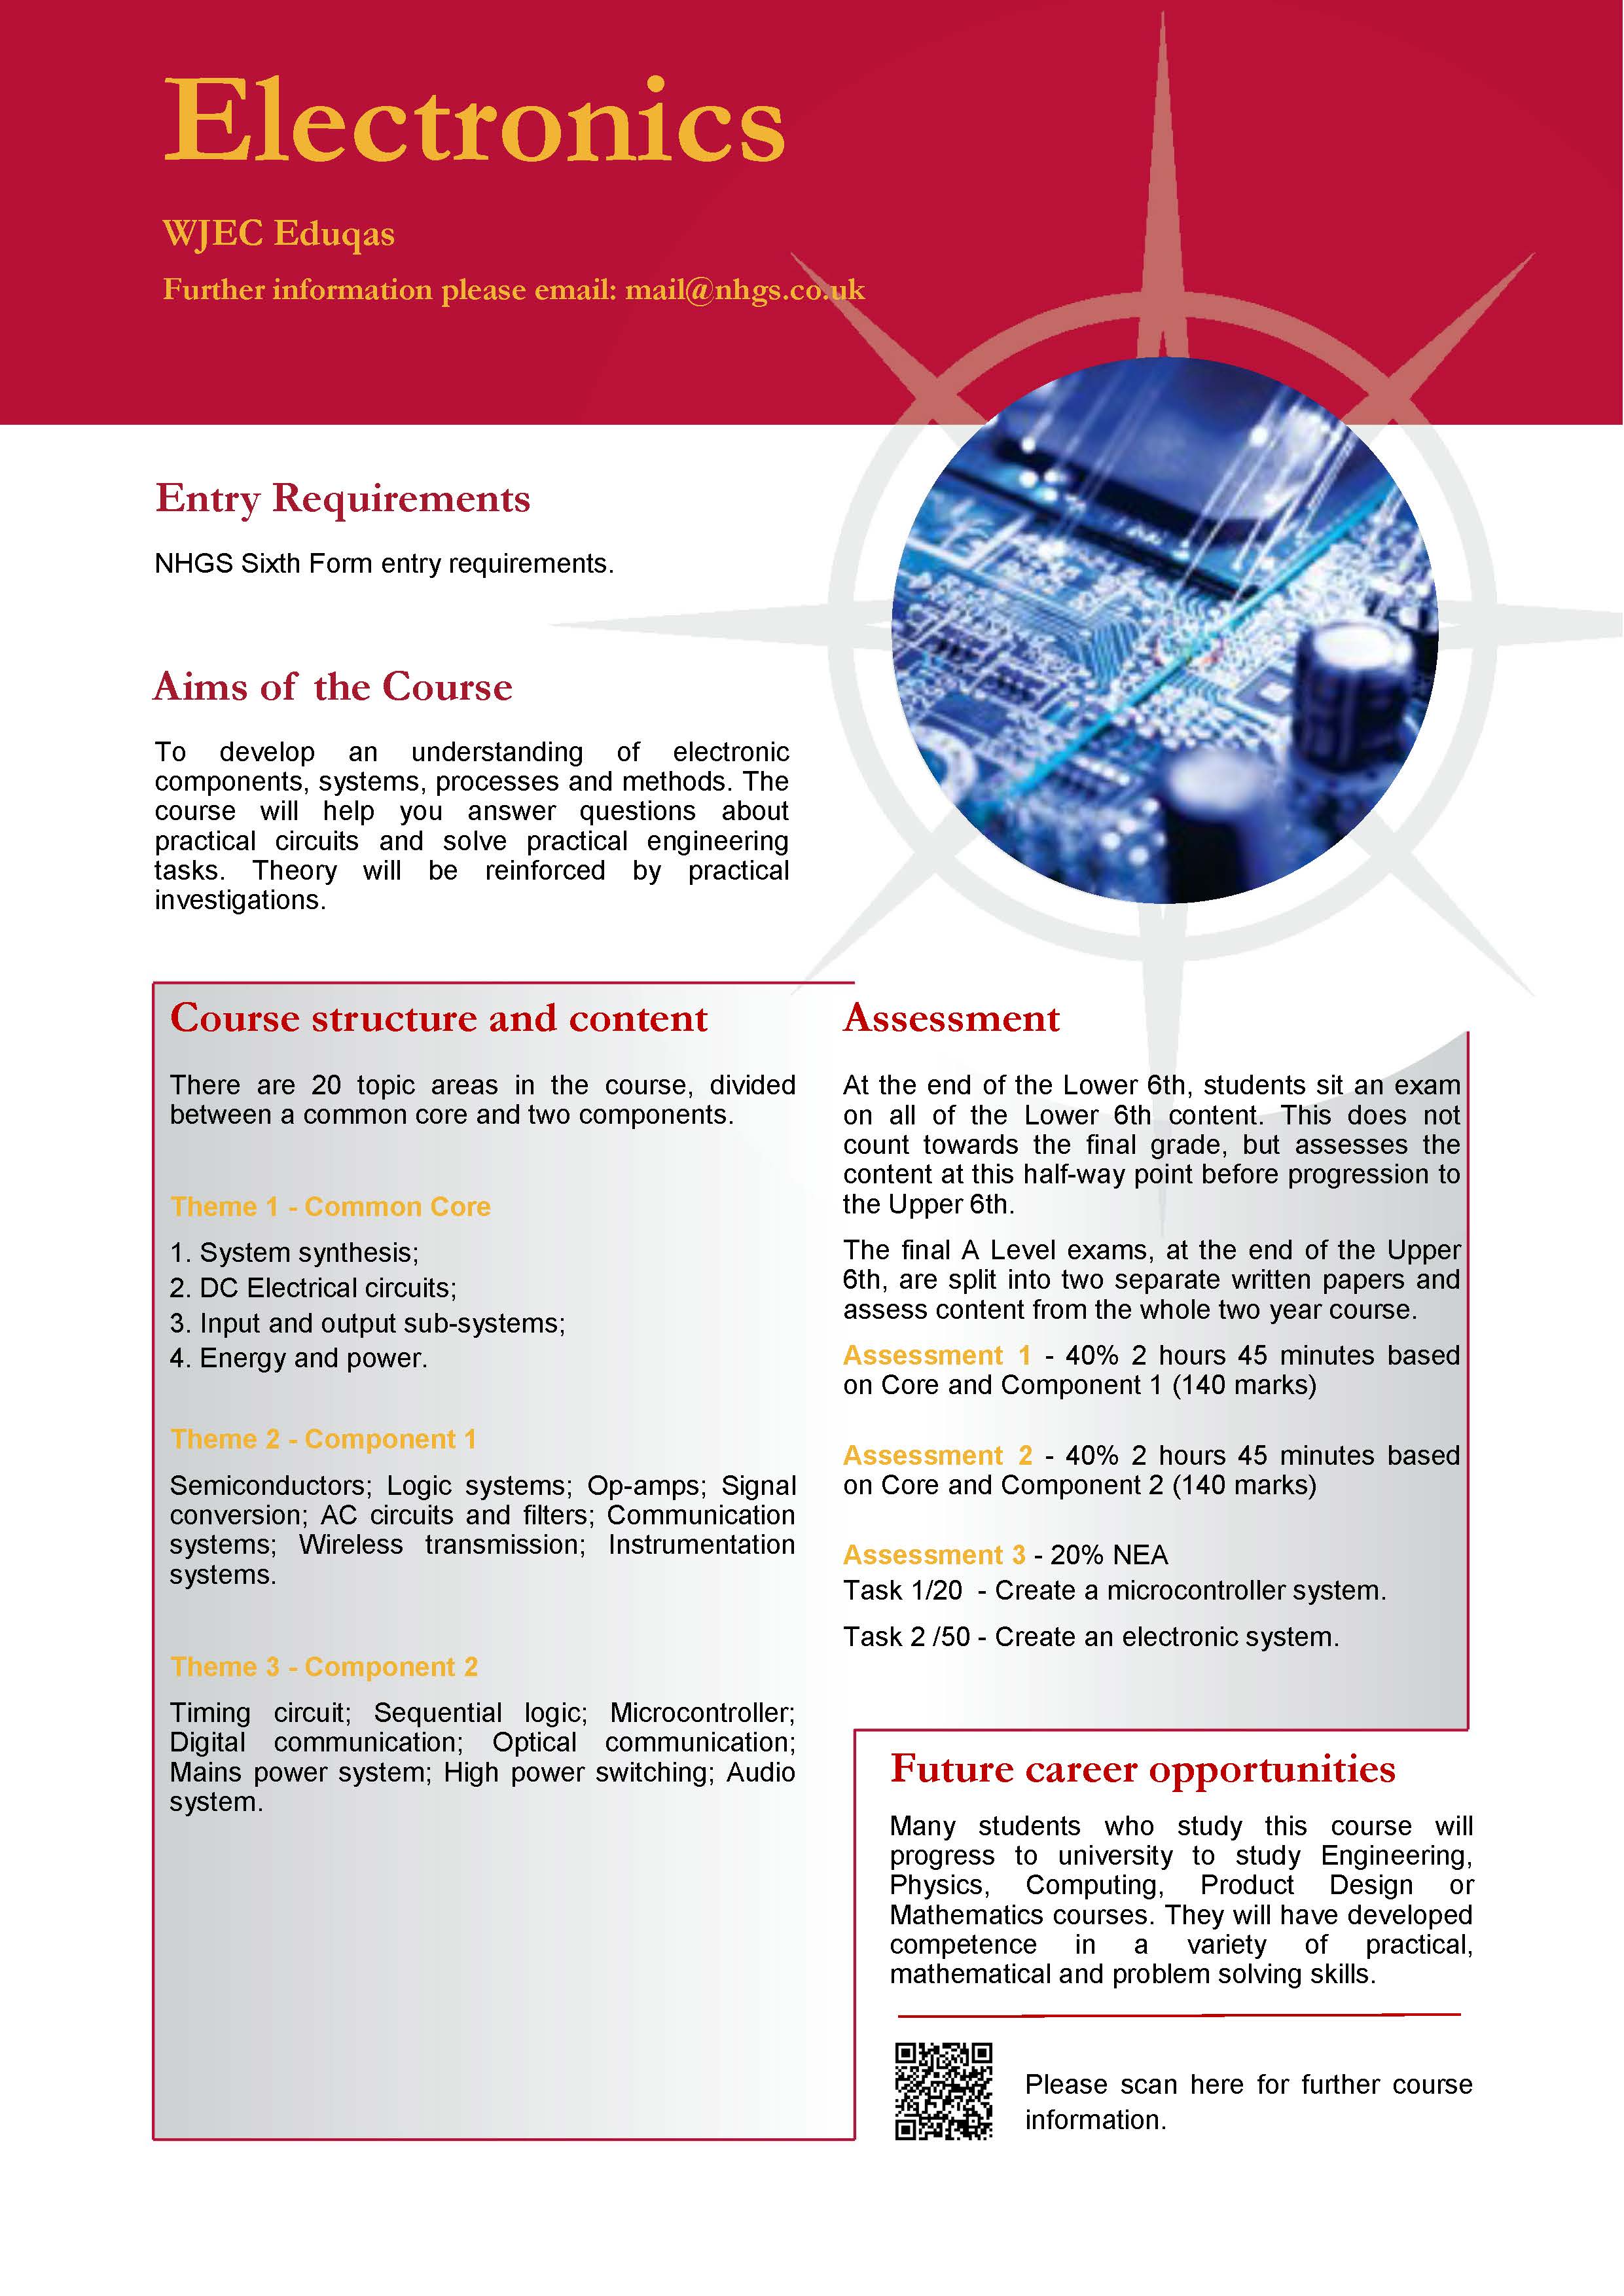 Electronics A Level Course Flyer, NHGS Sixth Form